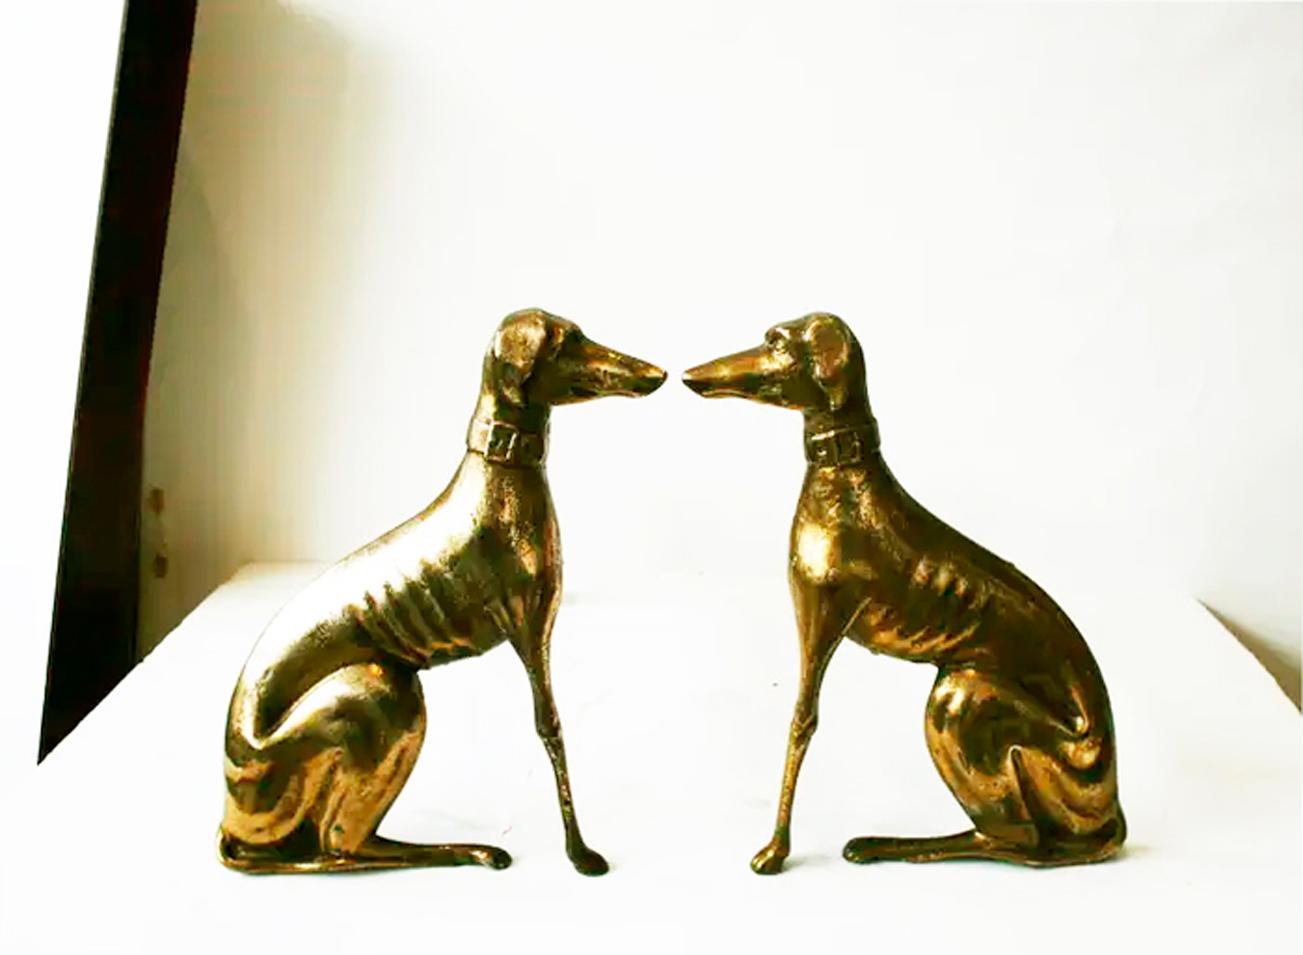 A pair of  brass greyhound dog andirons from  the 20th century. This pair of brass andirons features two greyhounds facing each other. Their facial expressions along with the details of their bodies are skillfully represented. 

The animals are